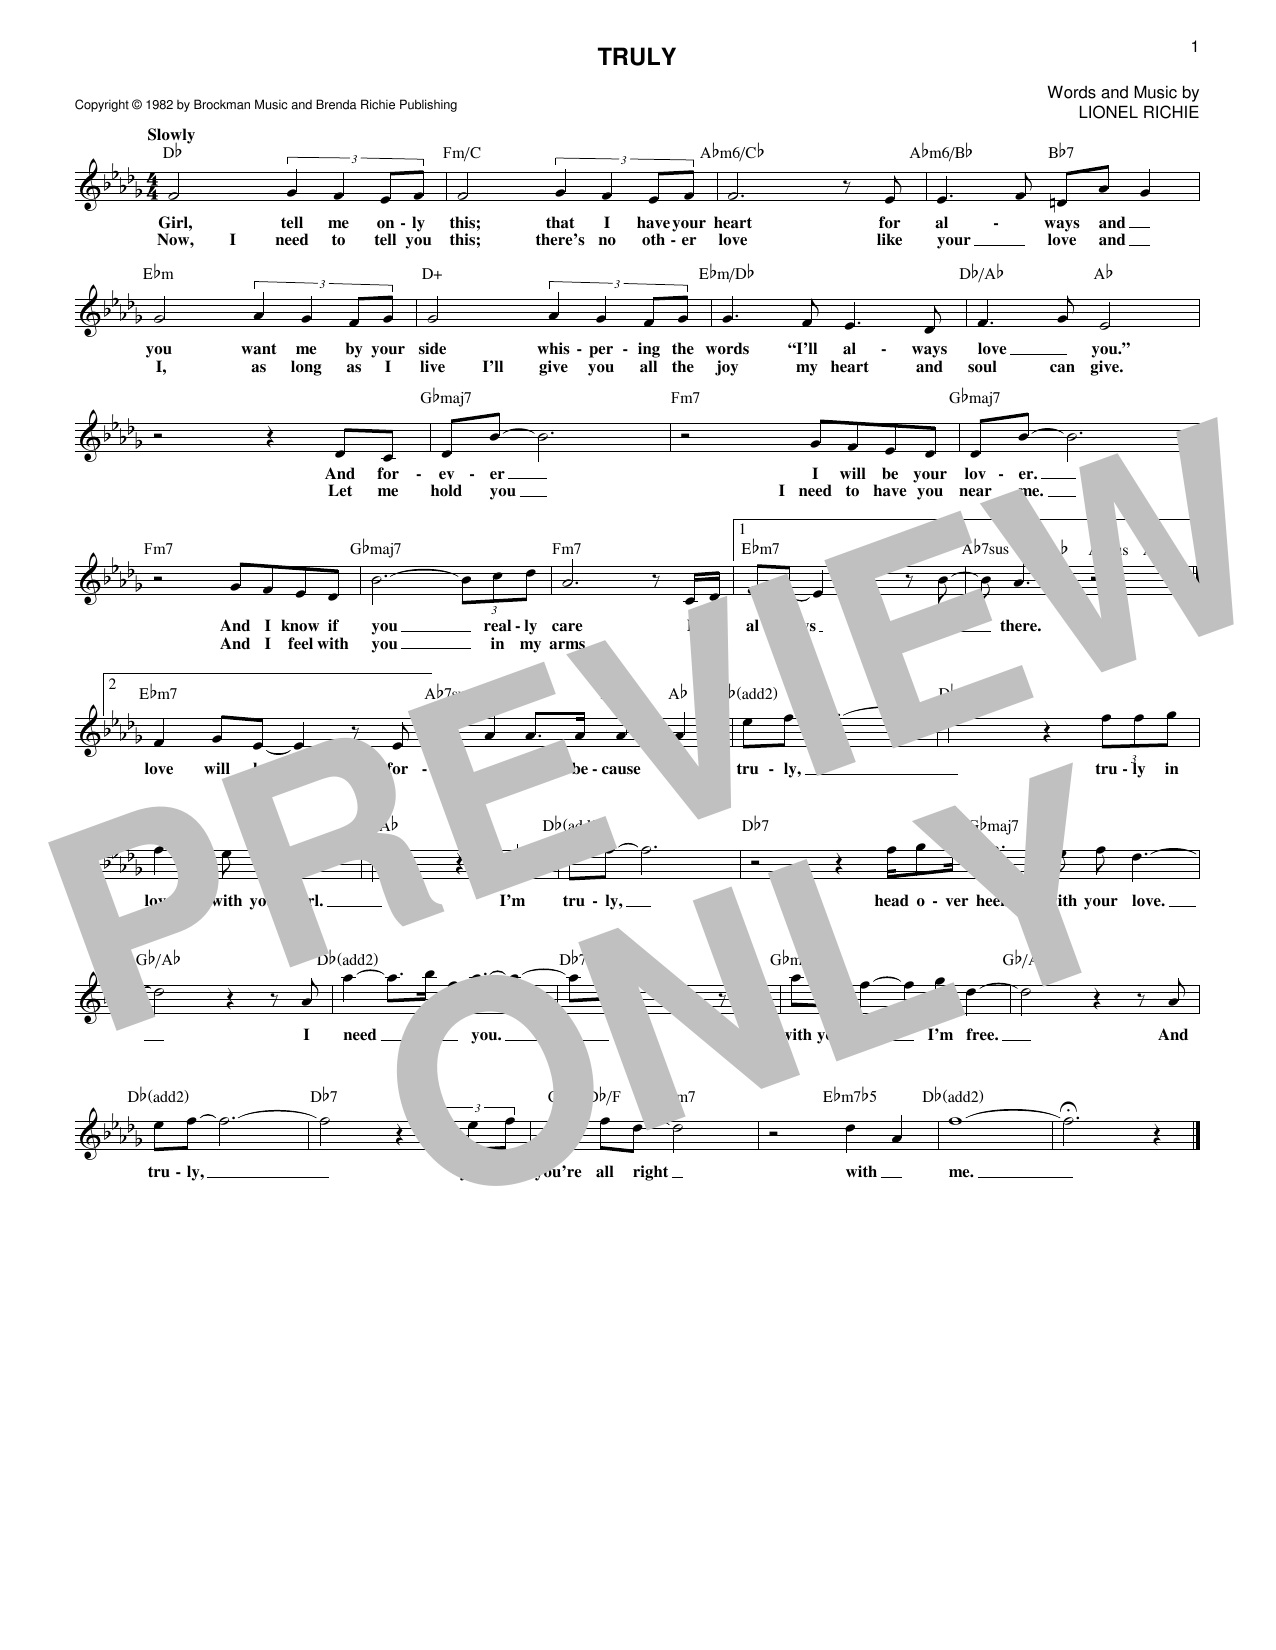 Download Lionel Richie Truly Sheet Music